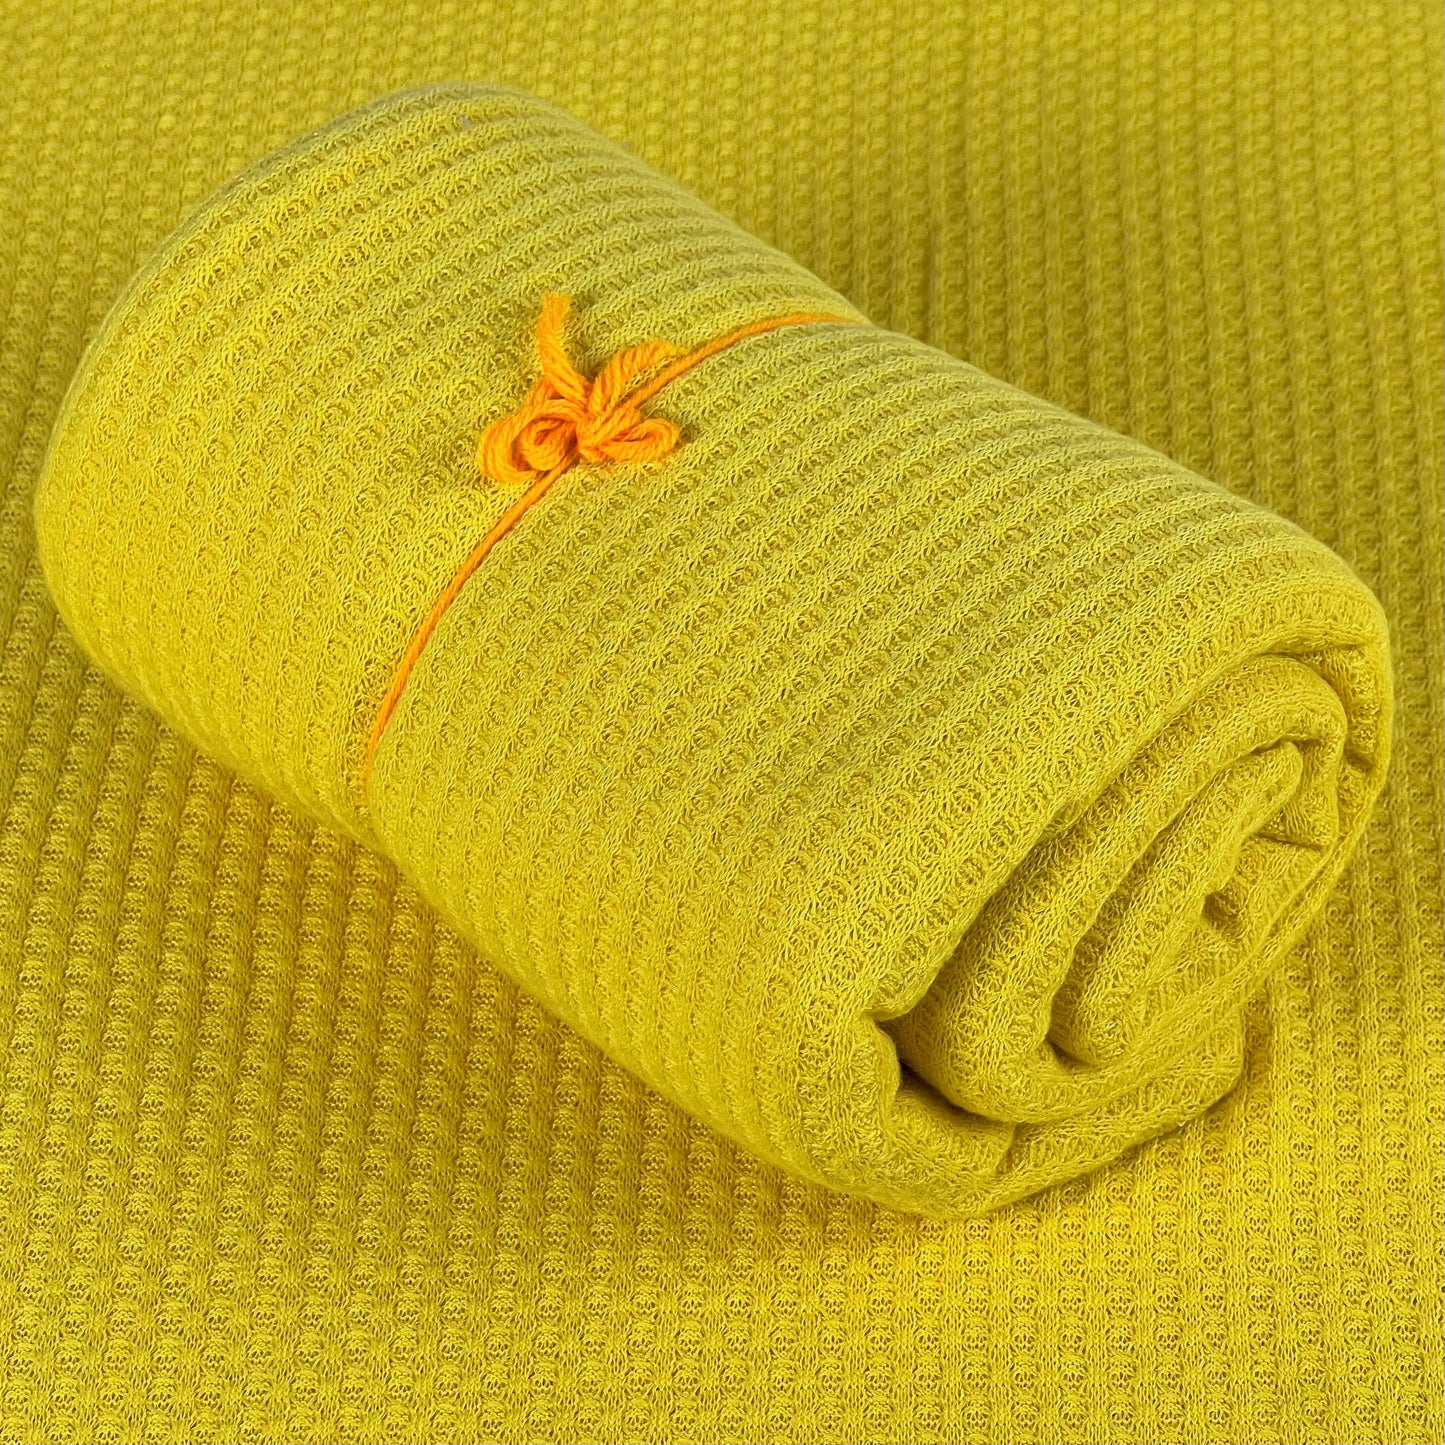 Baby Wrap - Perforated - Yellow